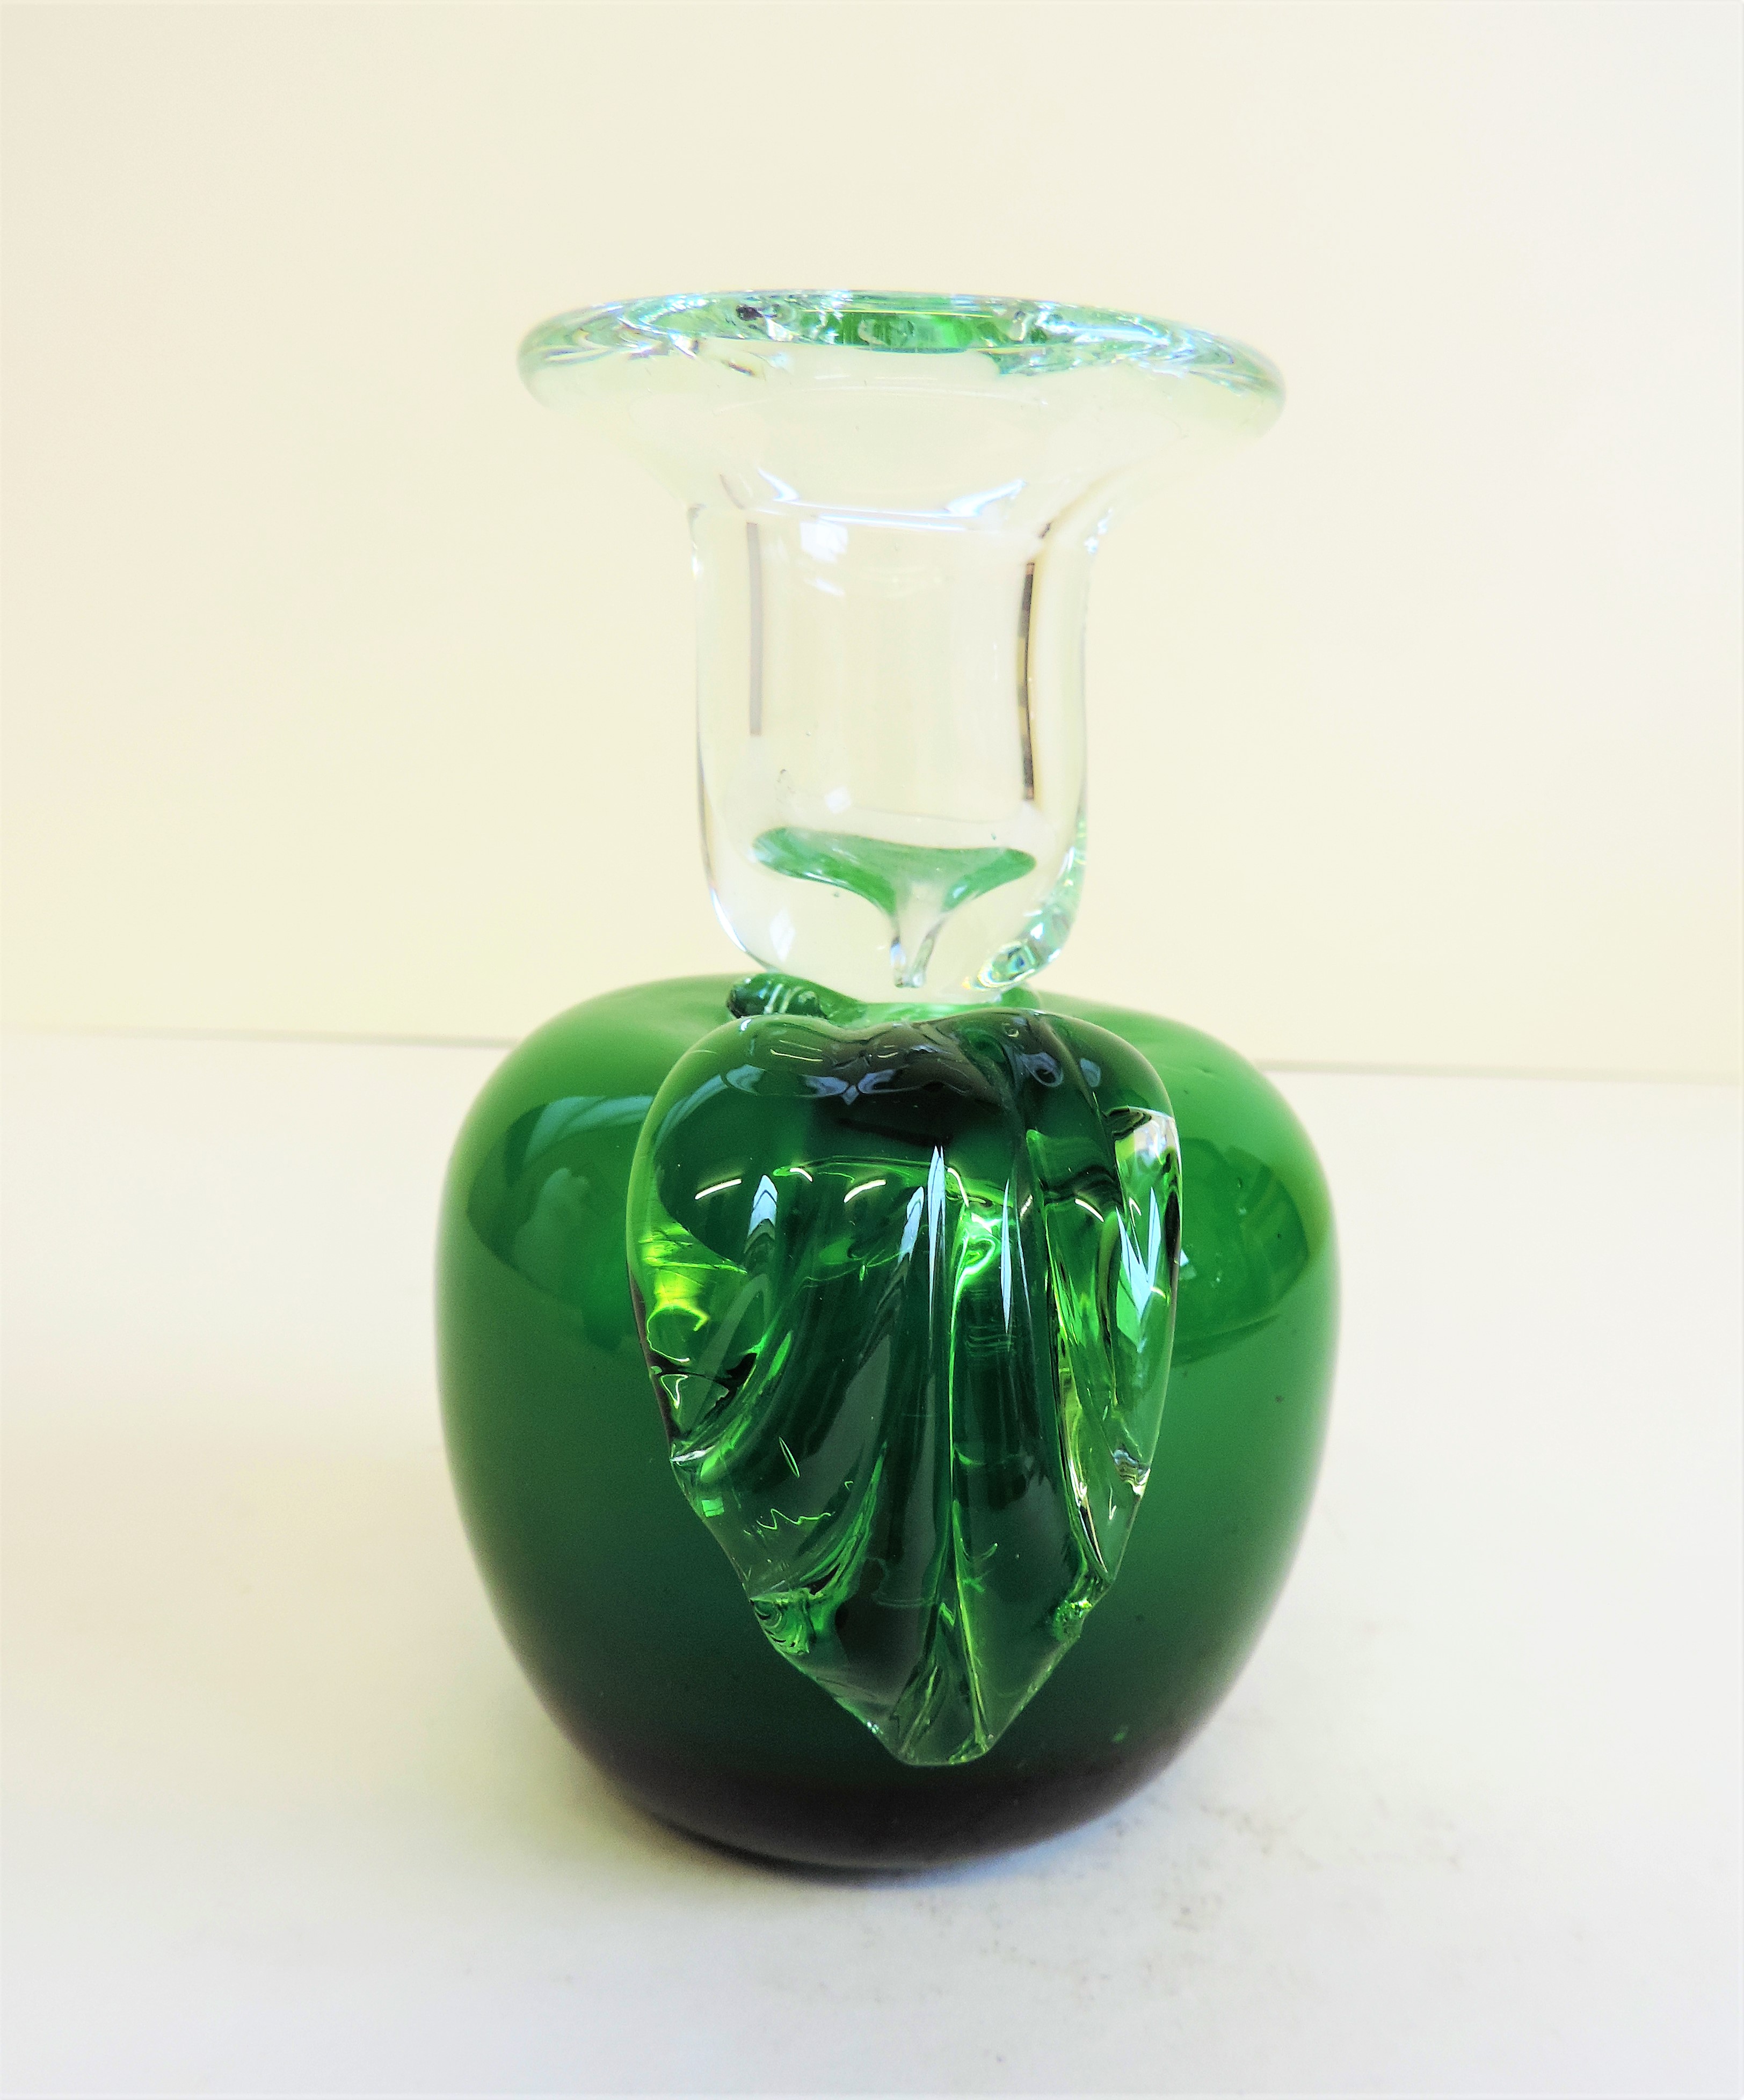 Green Art Glass Apple Shaped Candlestick - Image 4 of 4